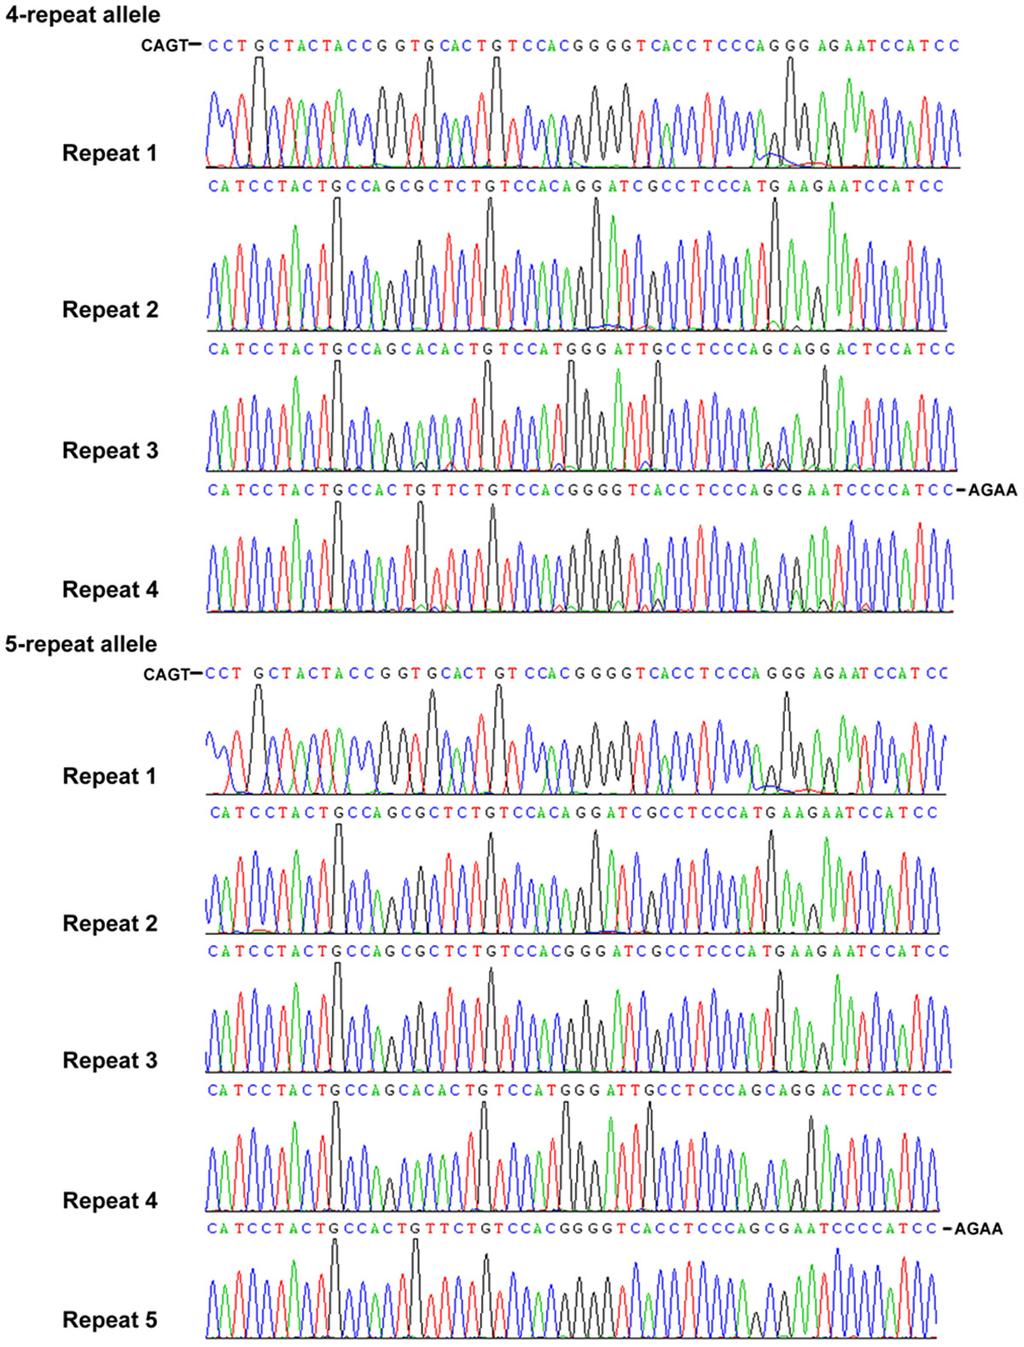 Figure 2. Nucleotide sequences of each allele in the polymorphic repeat region of the PER3. health characteristics, but few genetic determinants of these differences have been identified [16].